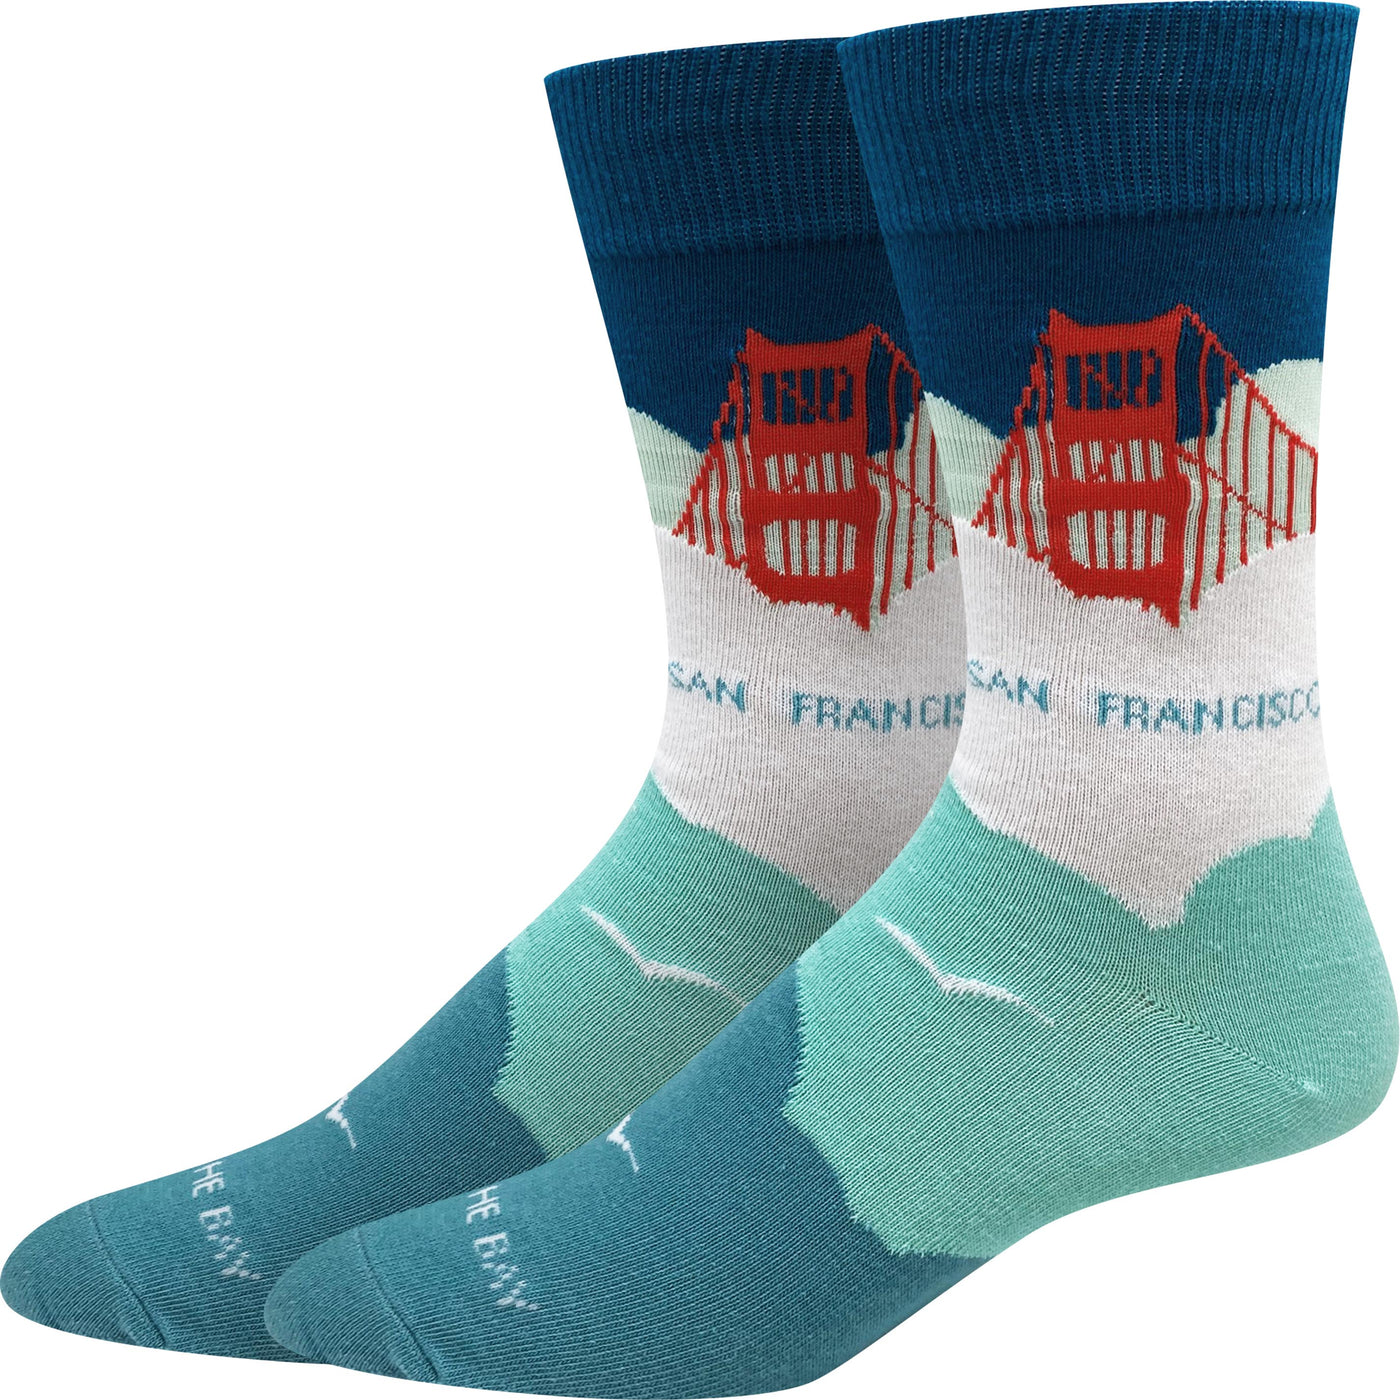 picture of foggy-san-francisco-socks